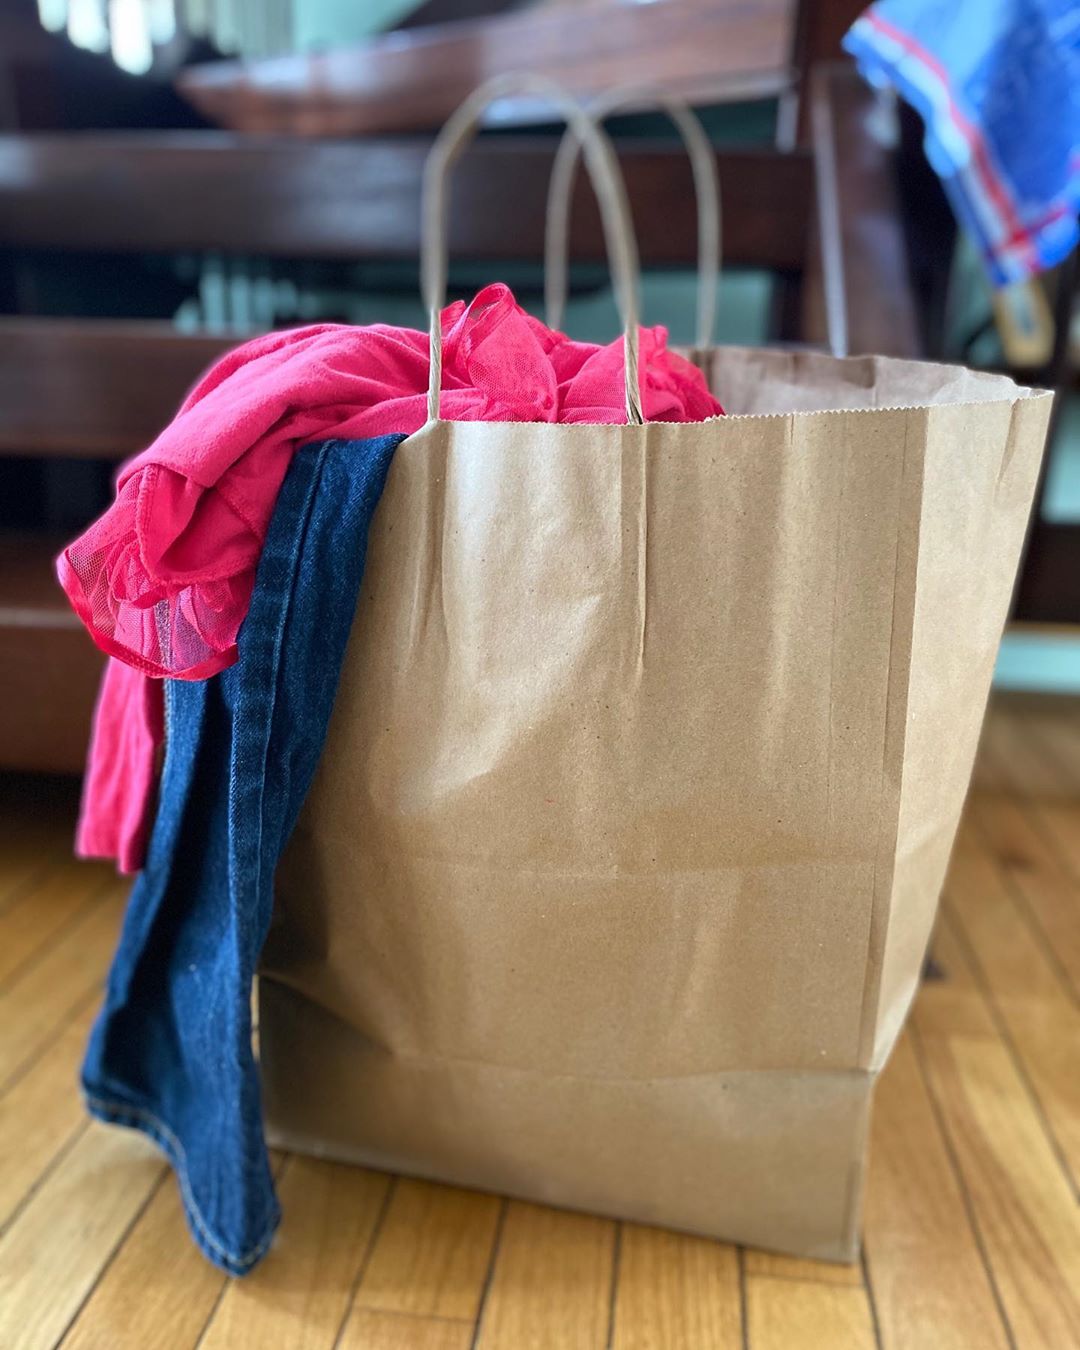 Brown bag of clothes. Photo by Instagram user @cahoots_company